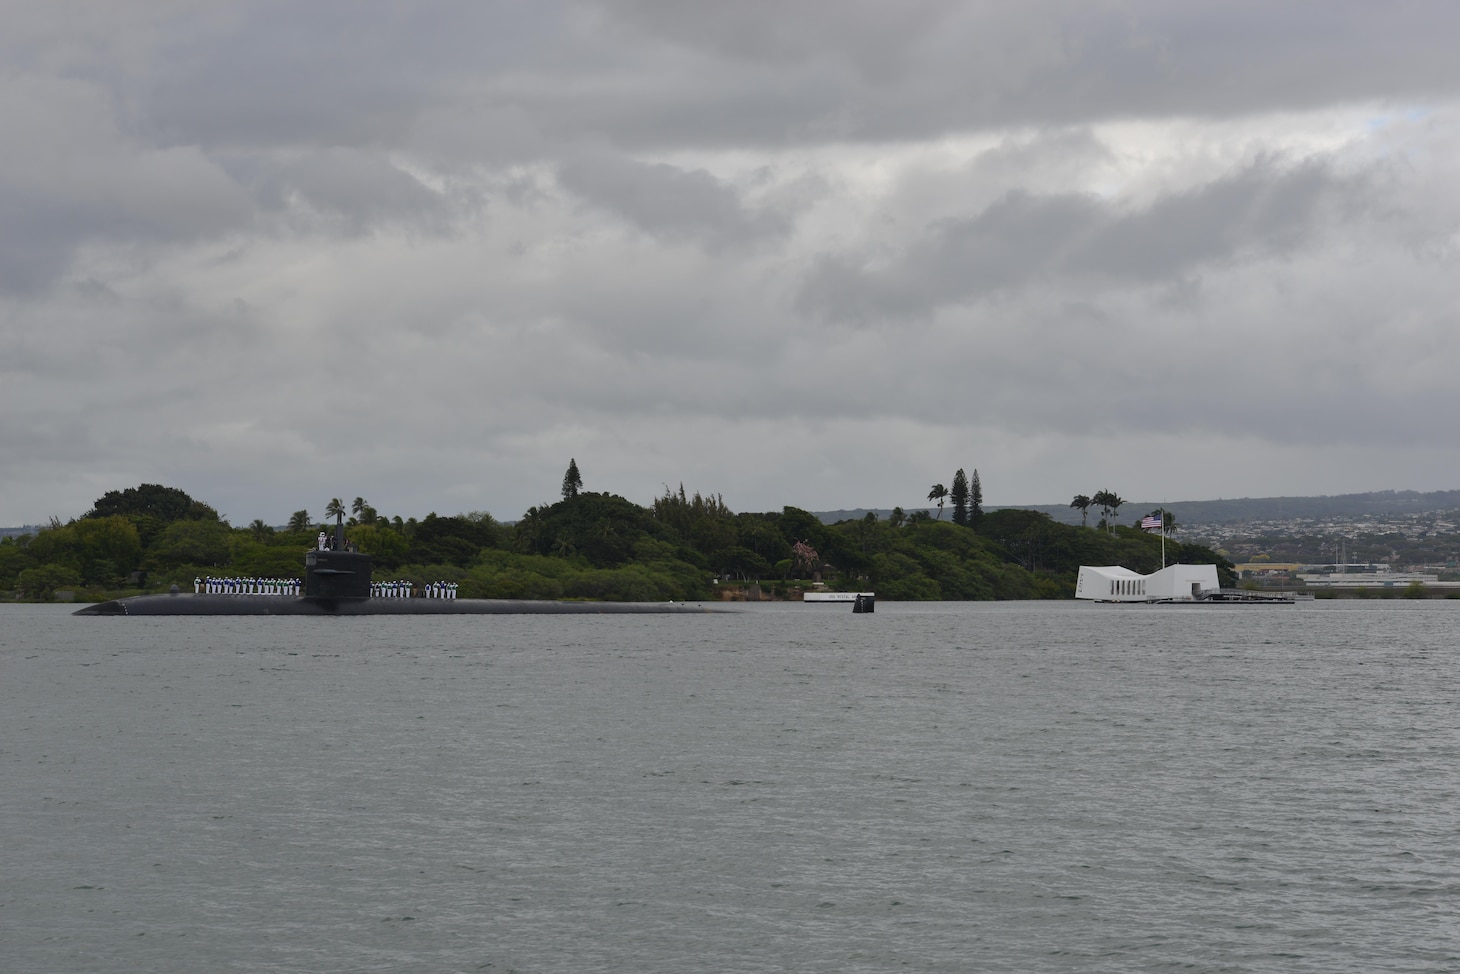 160606-N-LY160-088
PEARL HARBOR (June 6, 2016) Sailors, assigned to the Los Angeles-class fast-attack submarine USS Houston (SSN 713),  render honors to the USS Arizona Memorial as the ship departs Joint Base Pearl Harbor-Hickam for the final time, June 6. Houston is en route to Puget Sound Naval Shipyard in Bremerton, Washington, to commence its inactivation process and decommissioning after 33 years of service. (U.S. Navy photo by Mass Communication Specialist 2nd Class Michael H. Lee/Released)